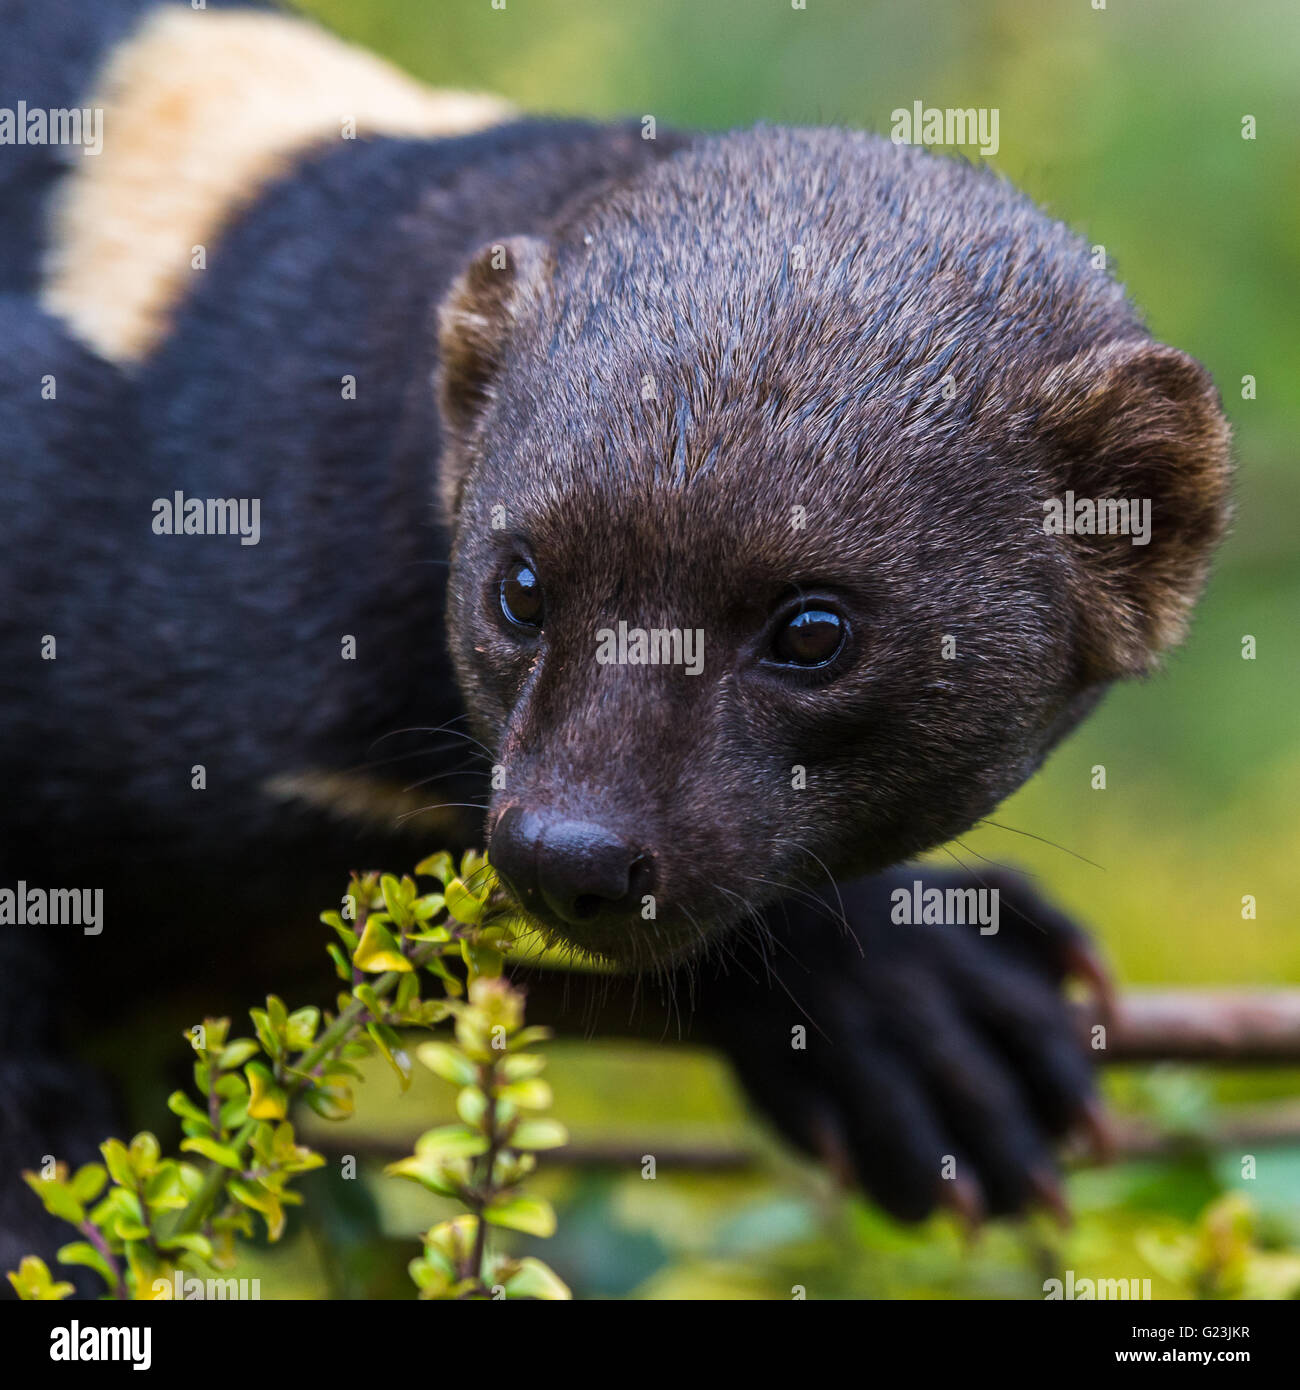 A Tayra (from the weasel family) lying on a branch of a large bush at the South Lakes Zoo in Cumbria. Stock Photo